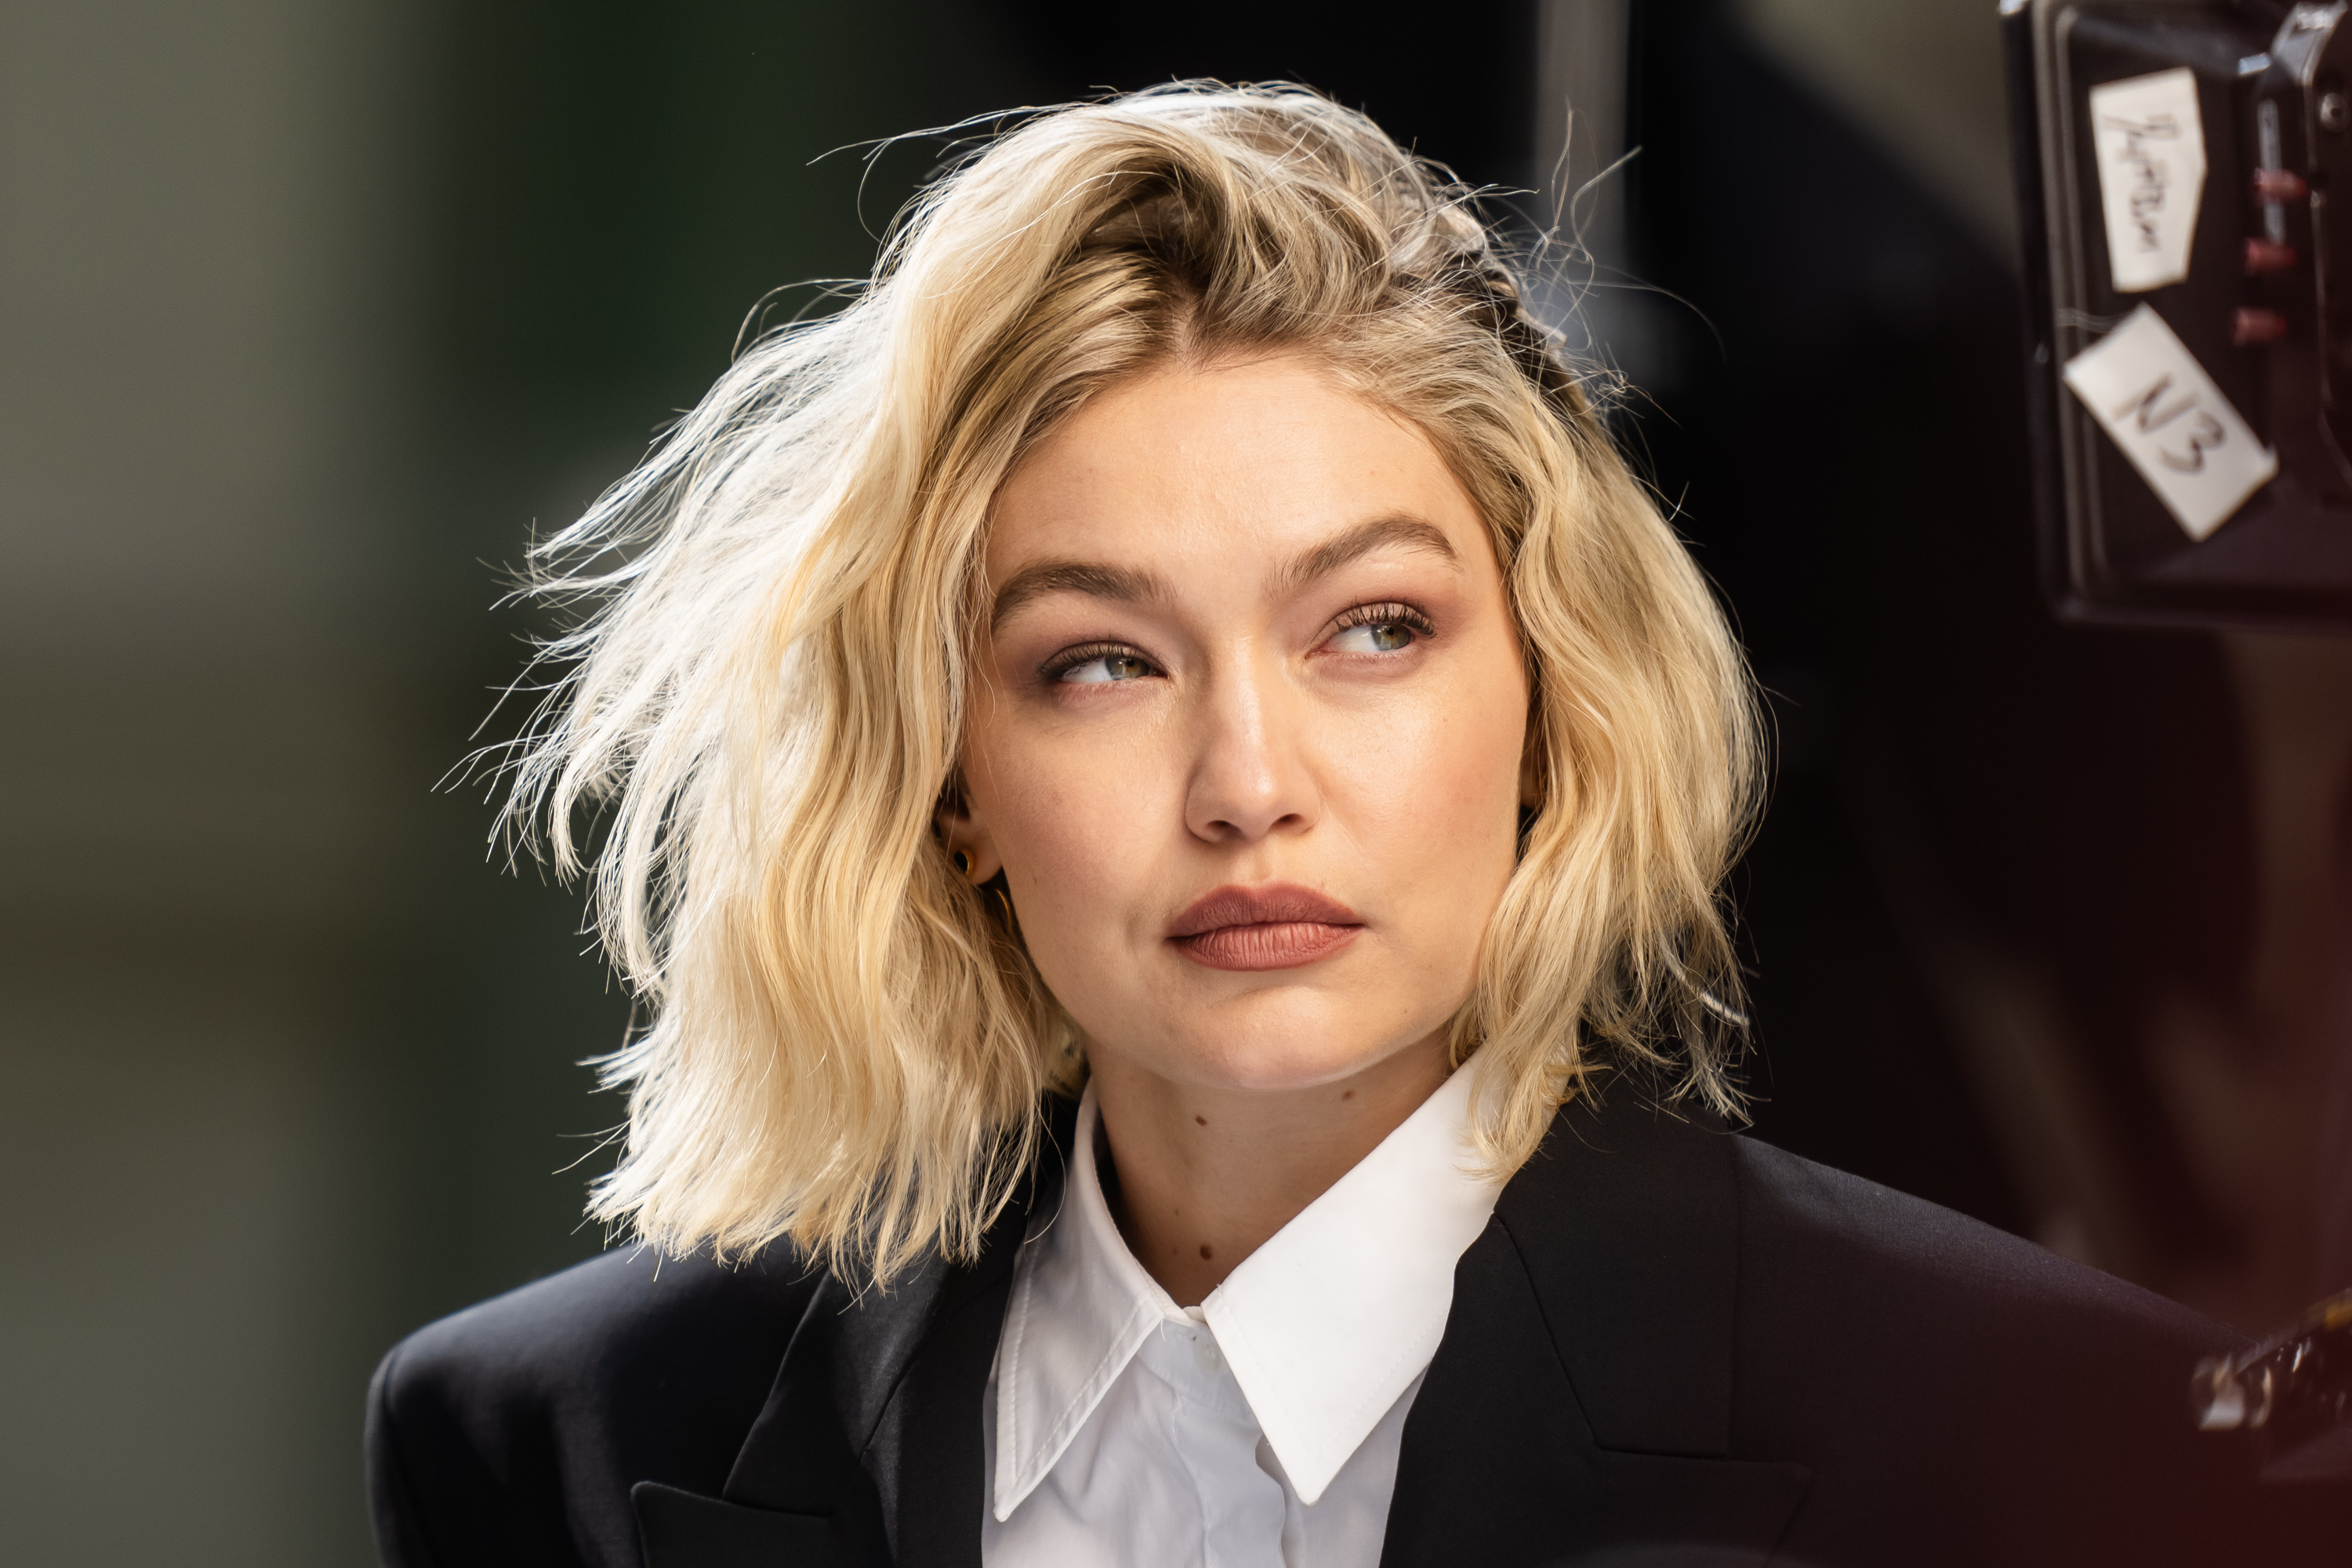 Gigi Hadid in a sleek suit looking away with a thoughtful expression